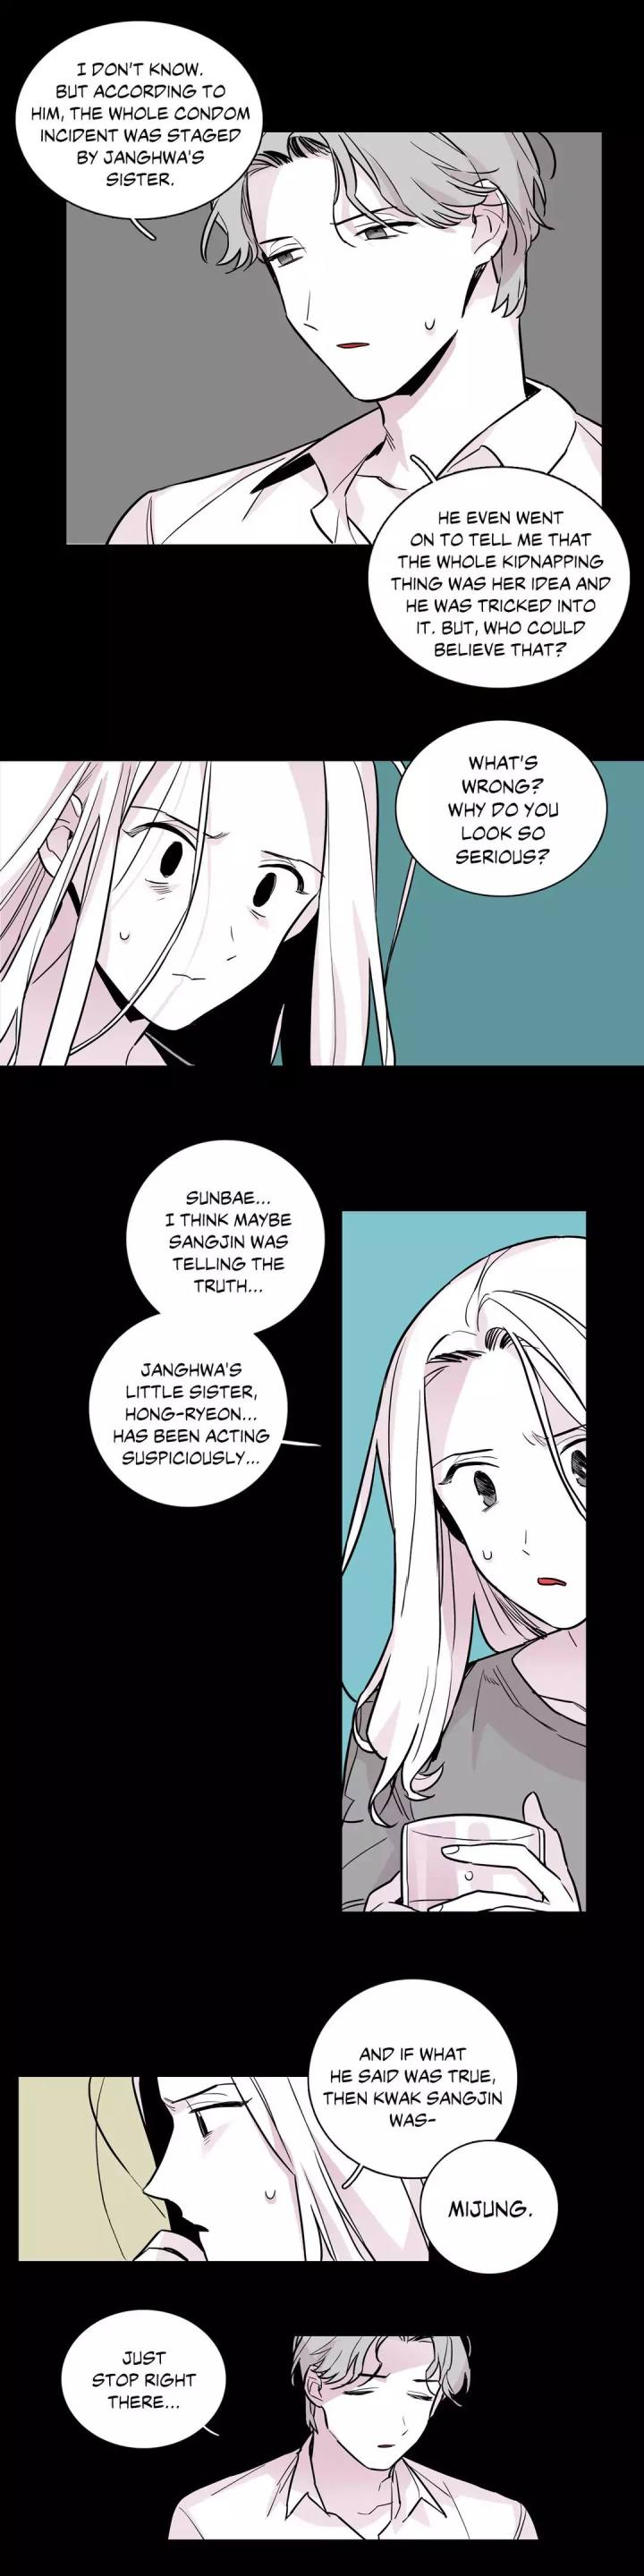 Vanishing Twin - Chapter 43 Page 2